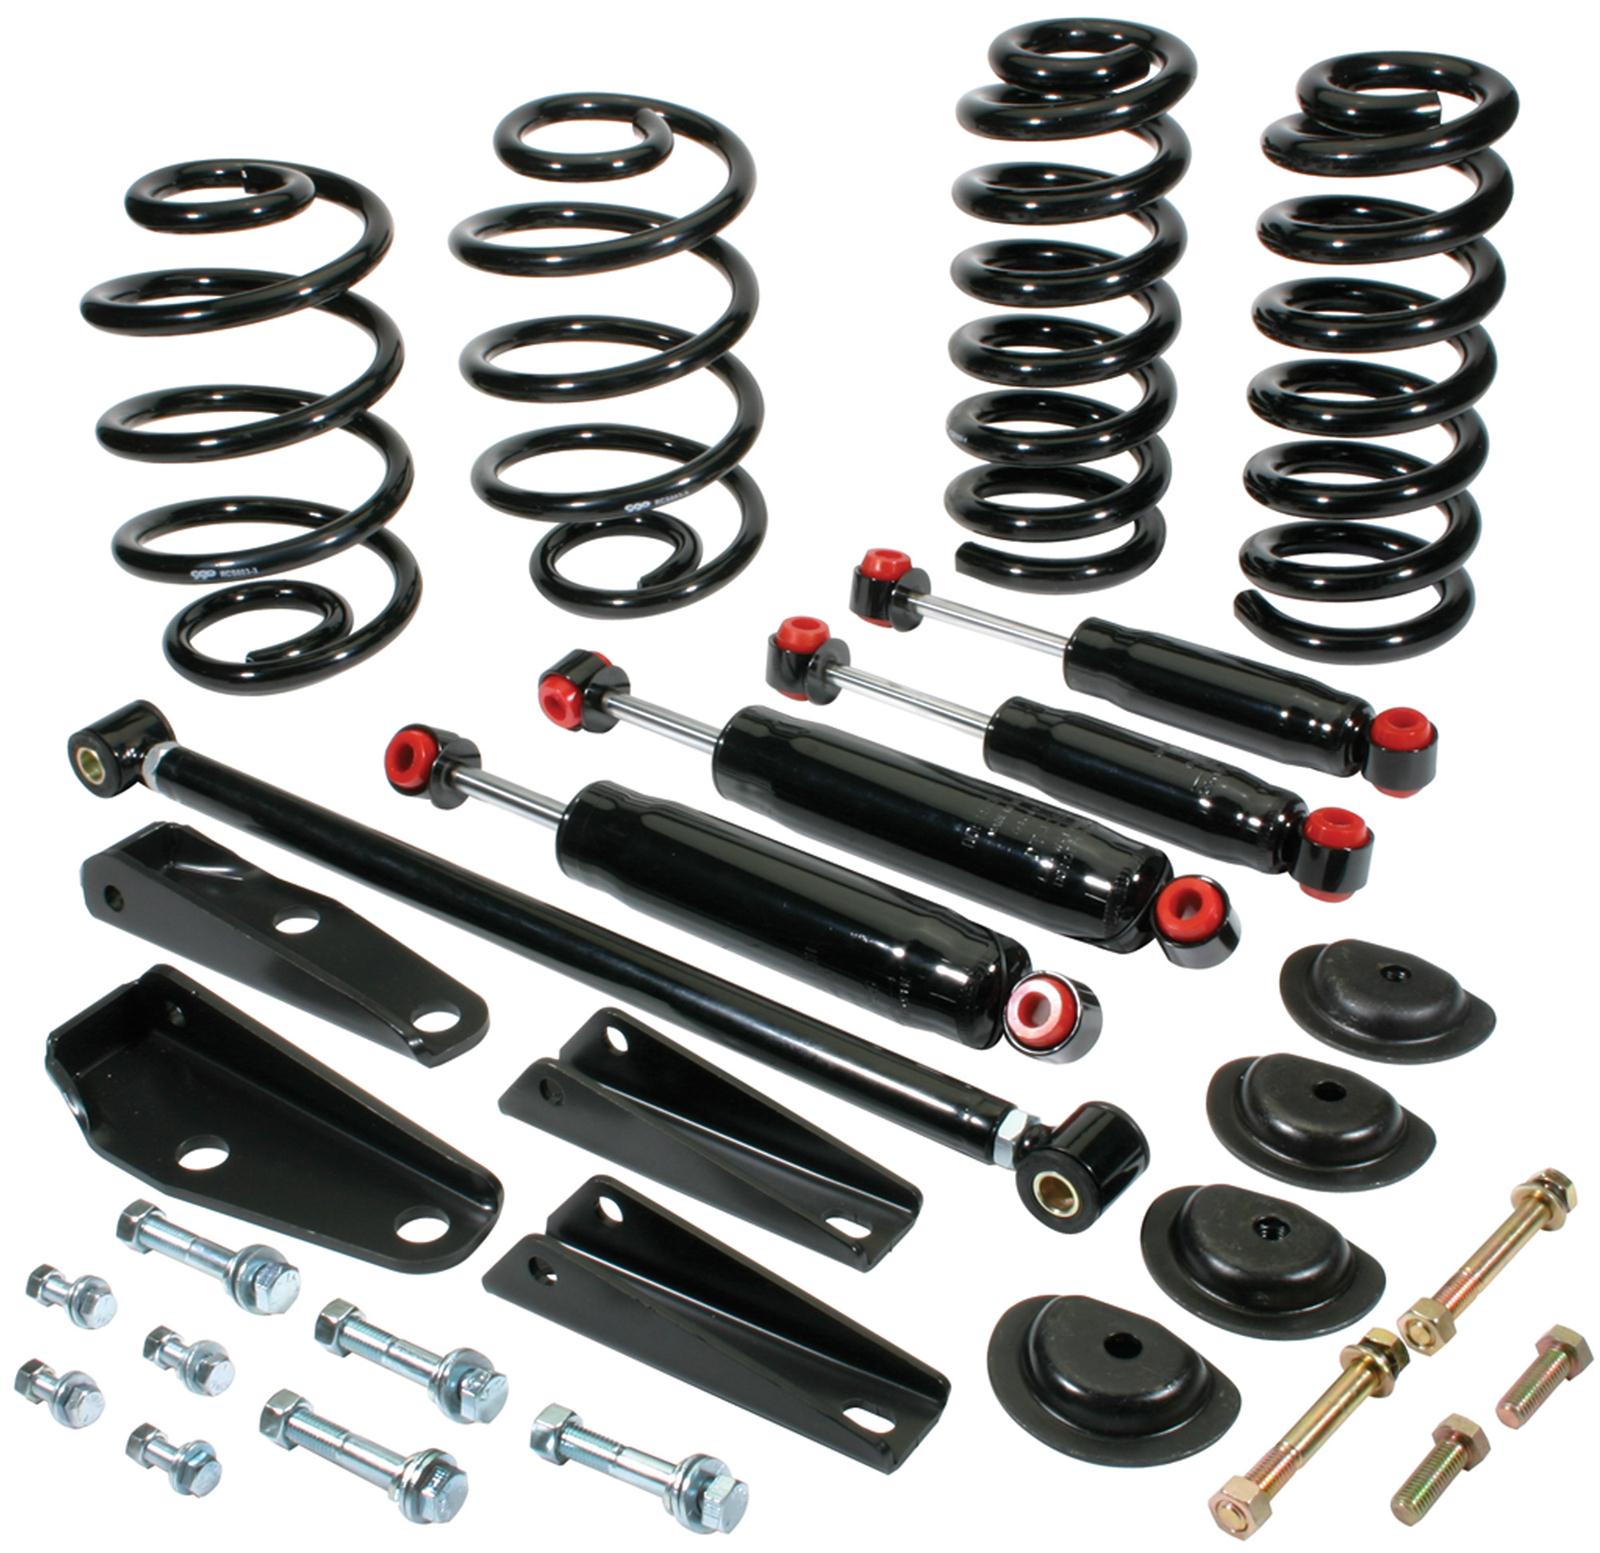 6372CSSK-D, Classic Performance Deluxe Lowering Kits.